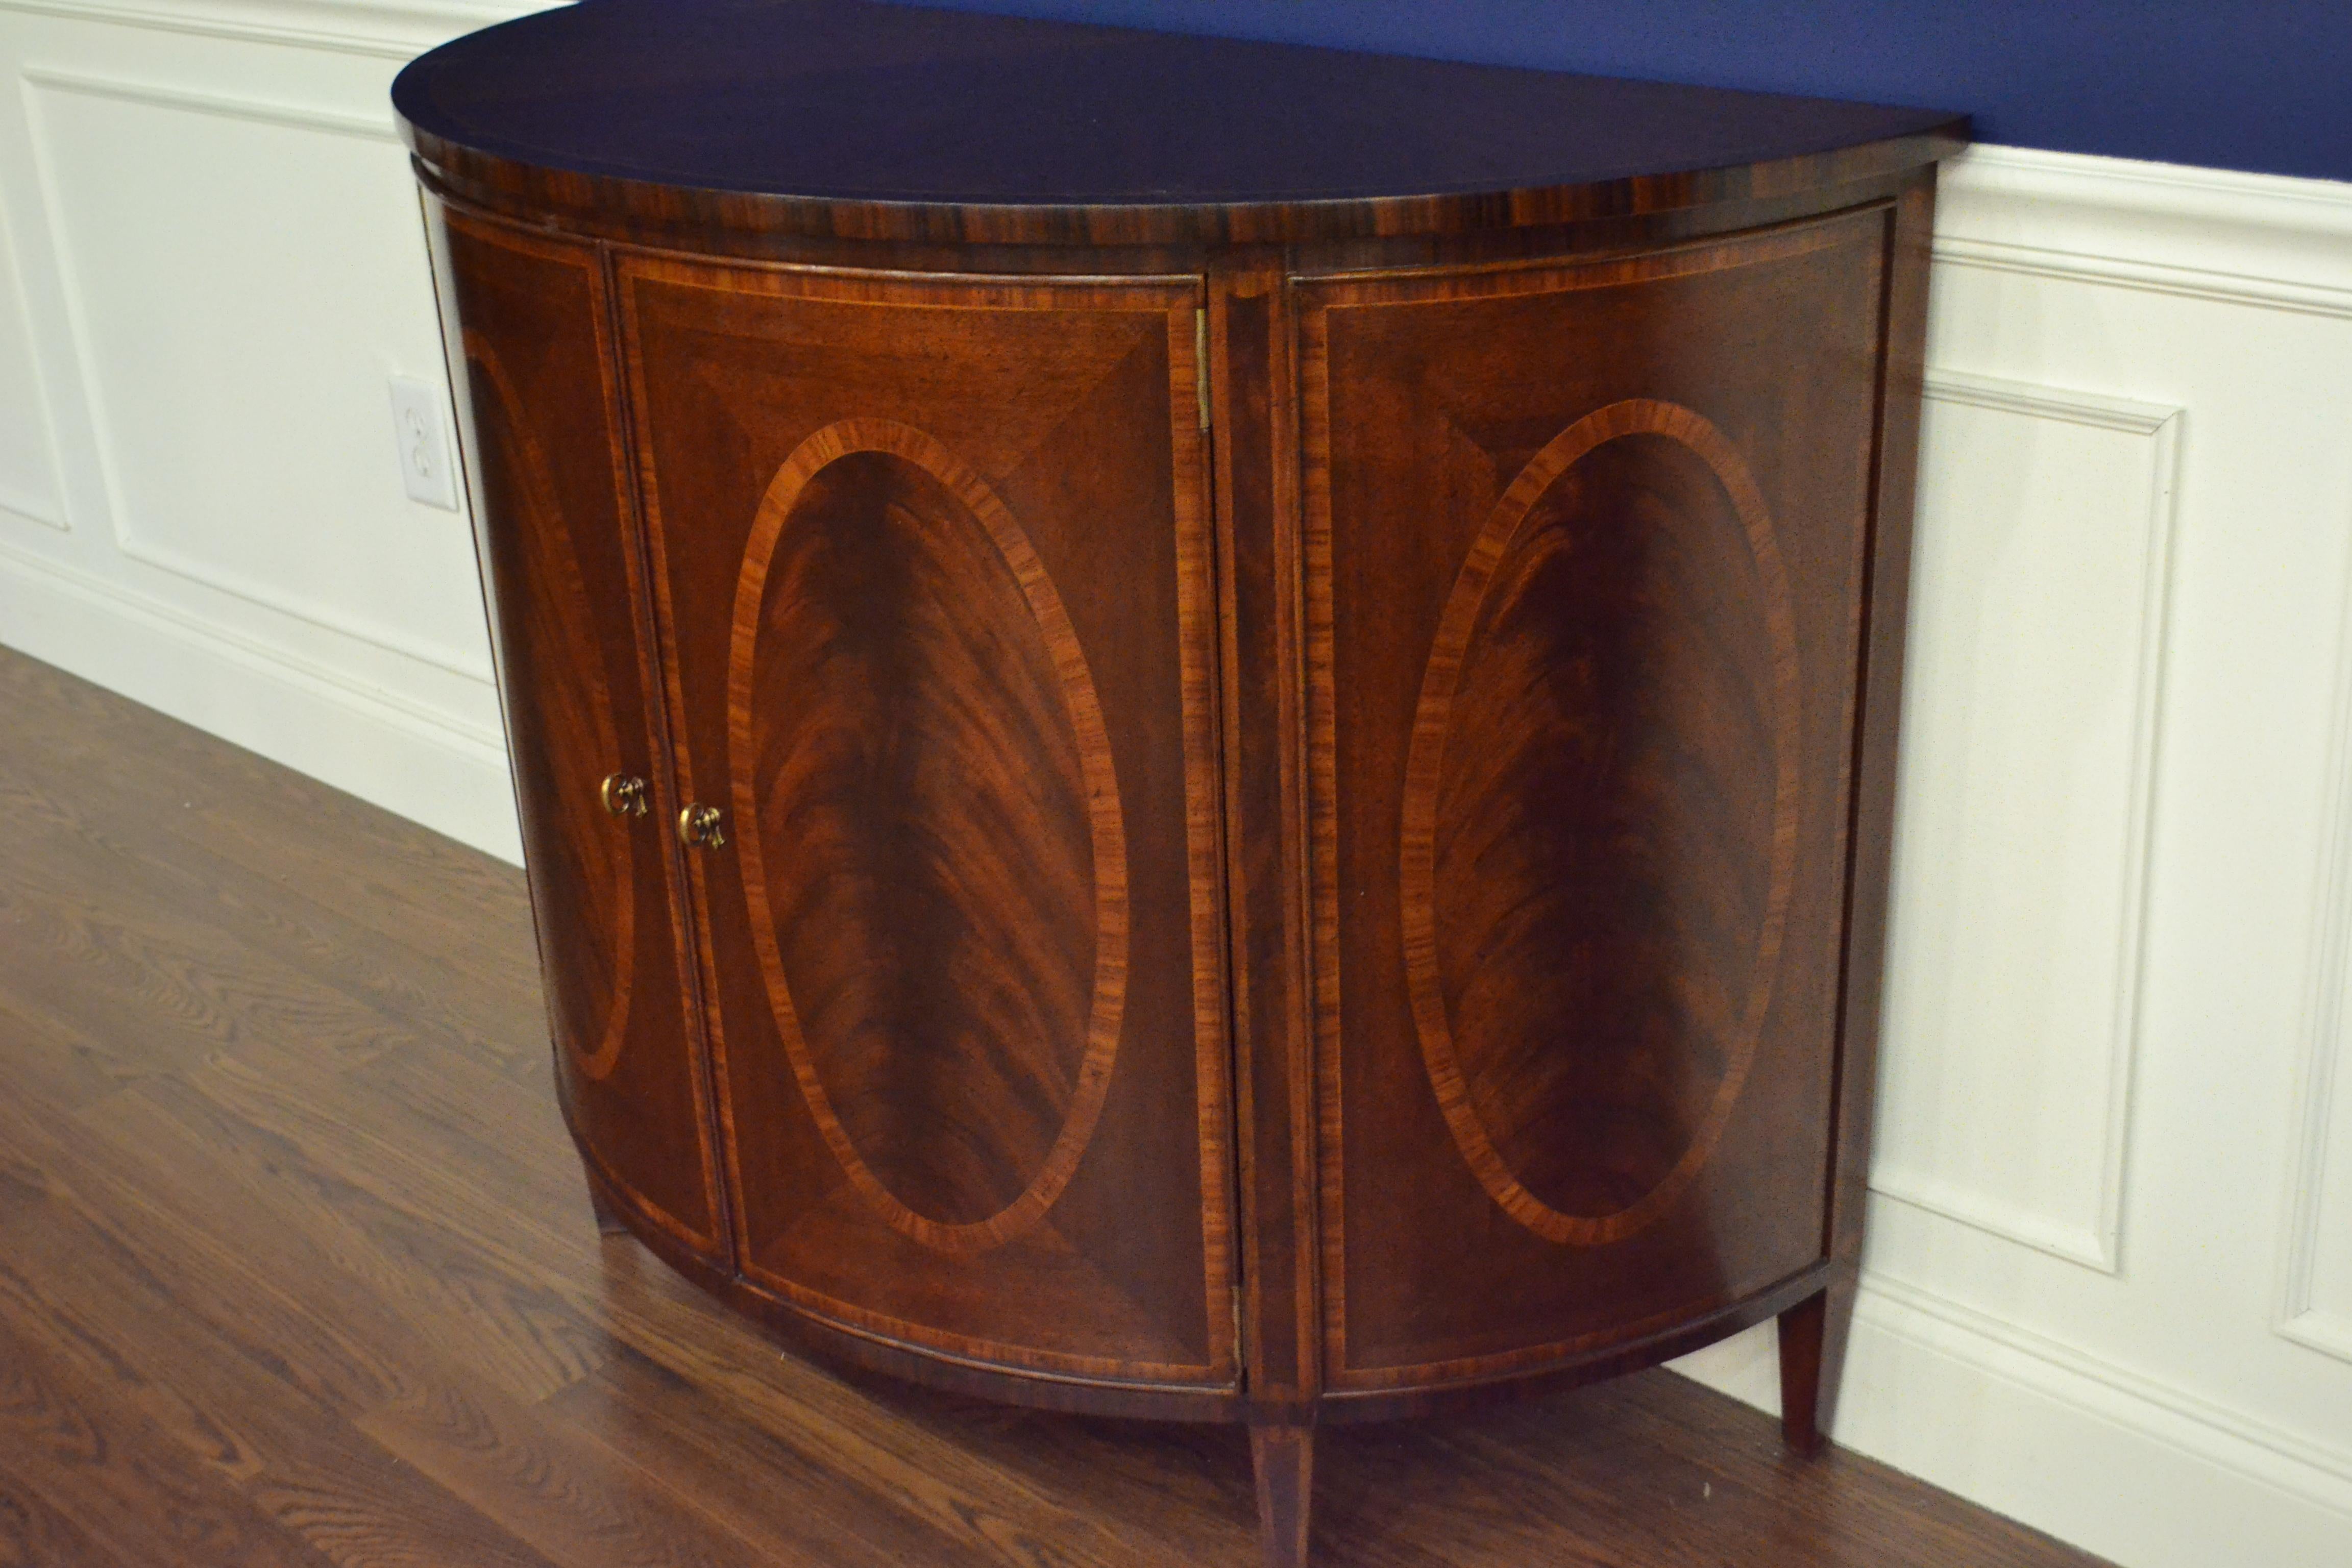 Hepplewhite Style Mahogany Demilune Cabinet by Leighton Hall In New Condition For Sale In Suwanee, GA